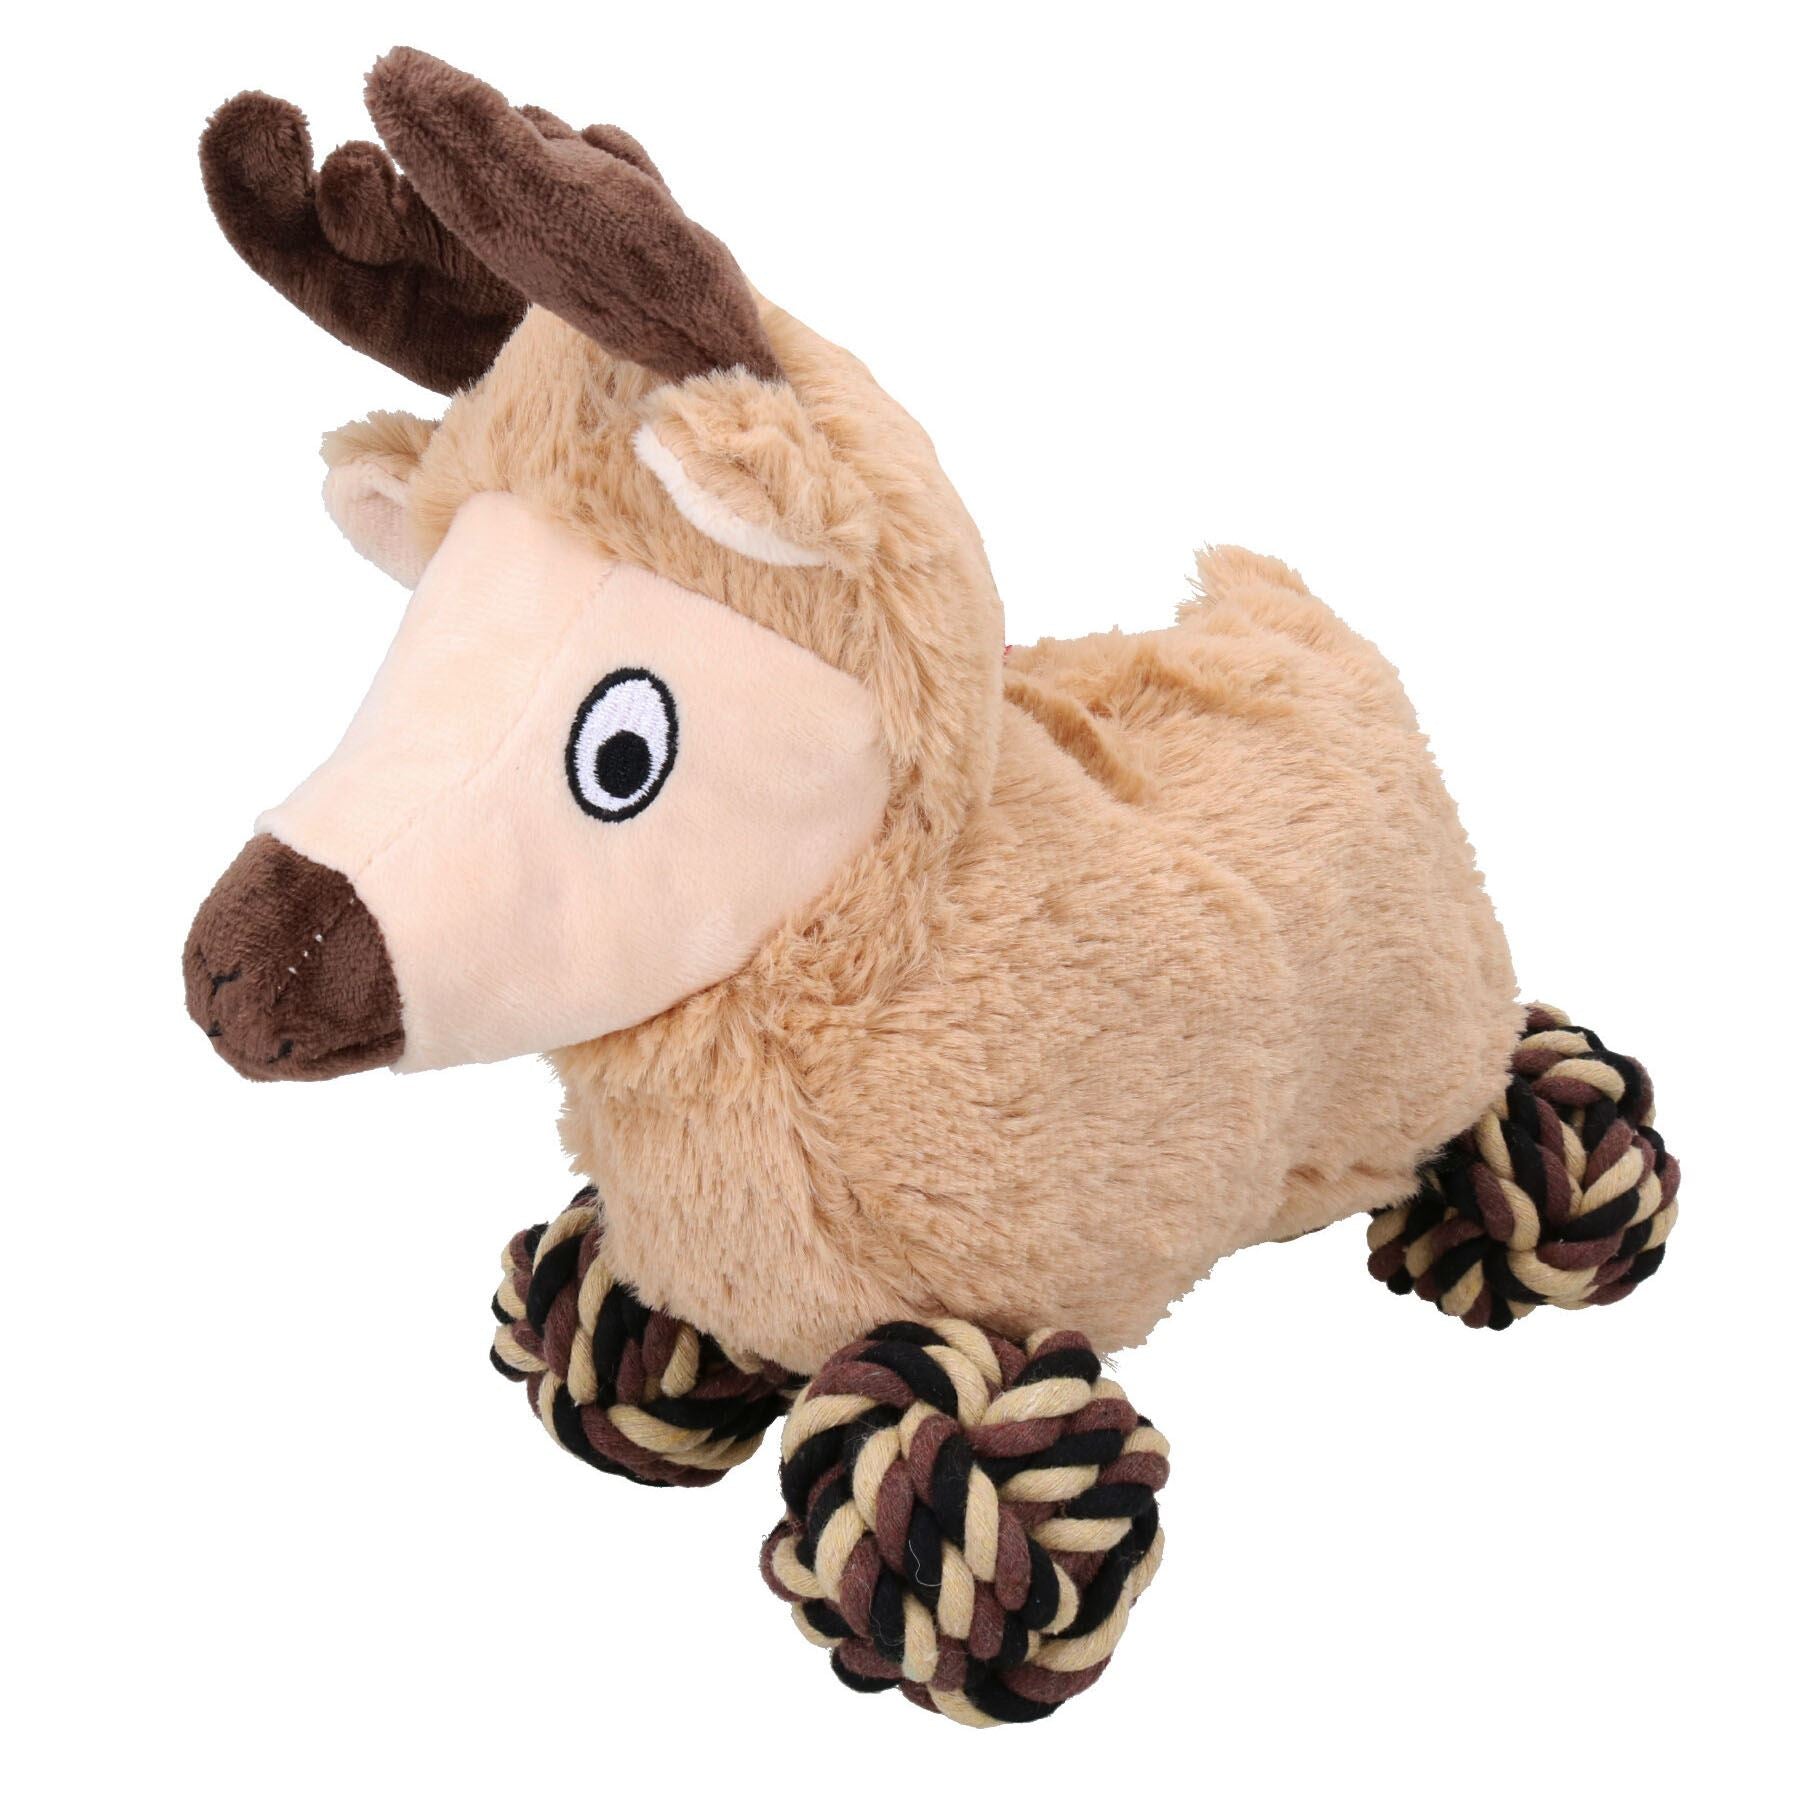 Dog Christmas Gift Super Soft Plush Rope Reindeer Play Toy Present With Squeak